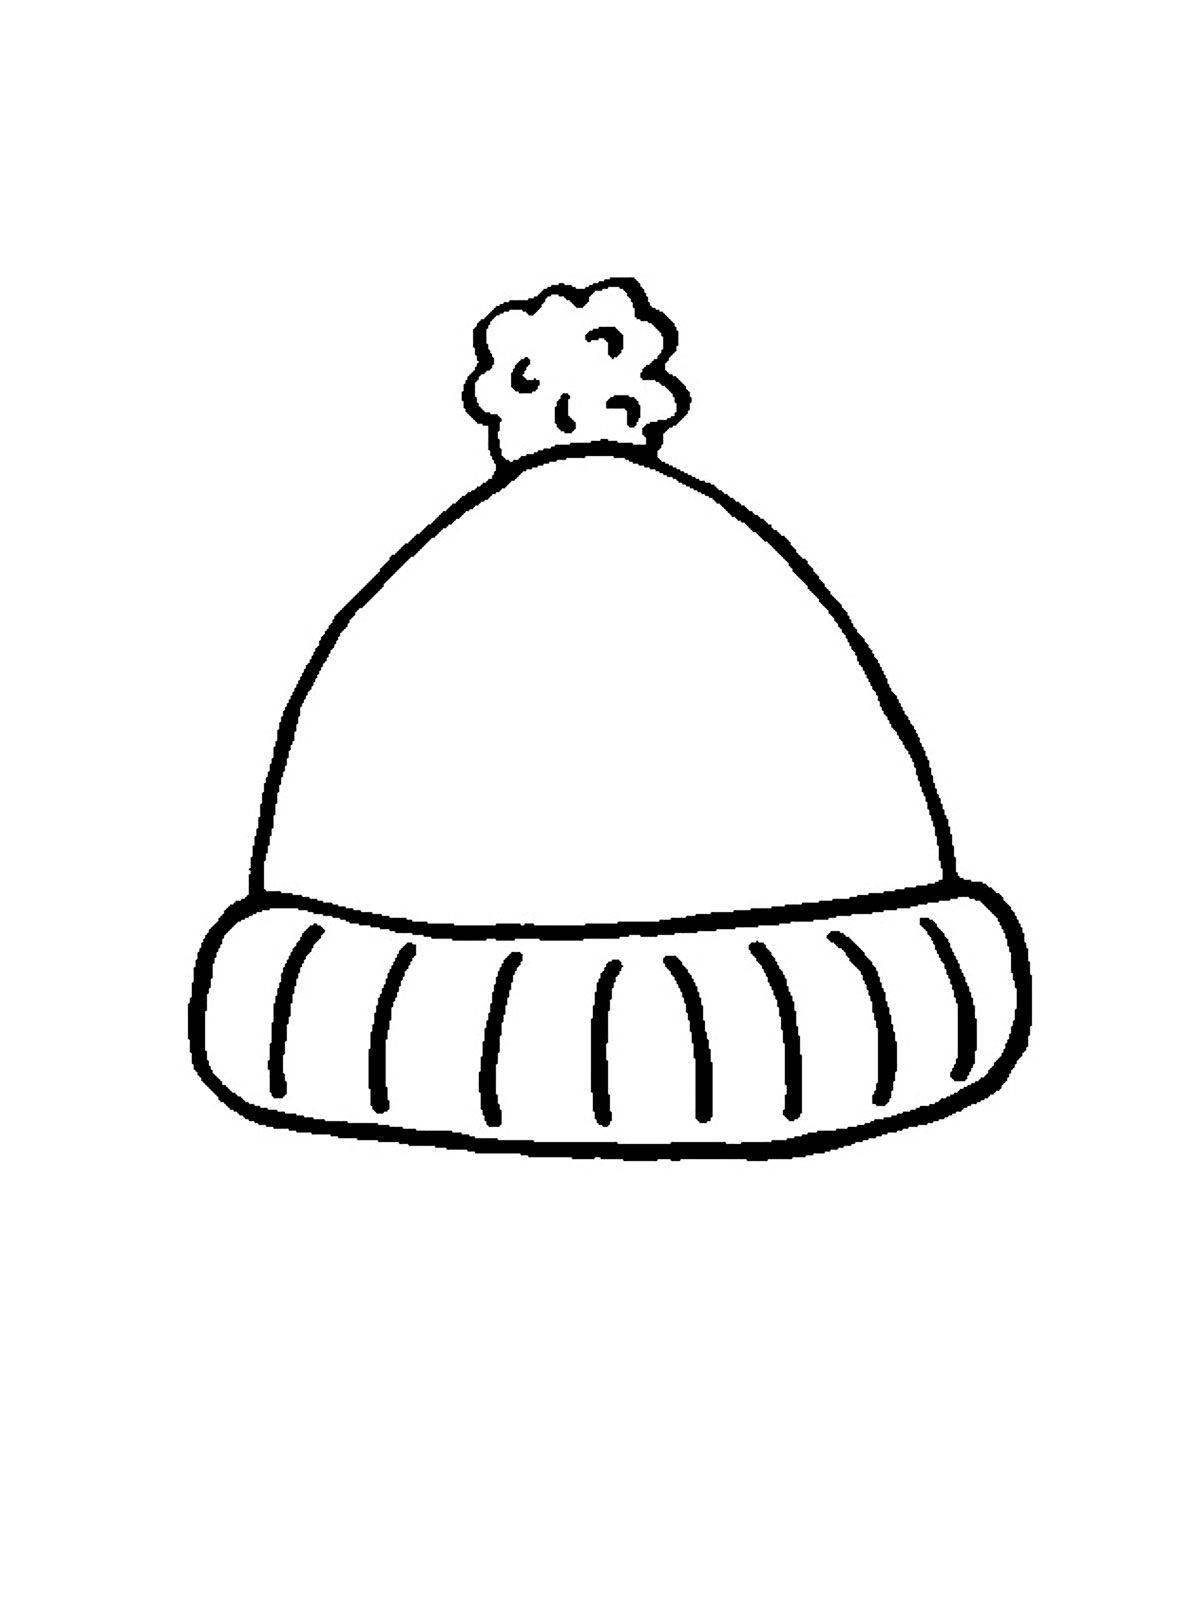 Coloring page luxury scarf and hat